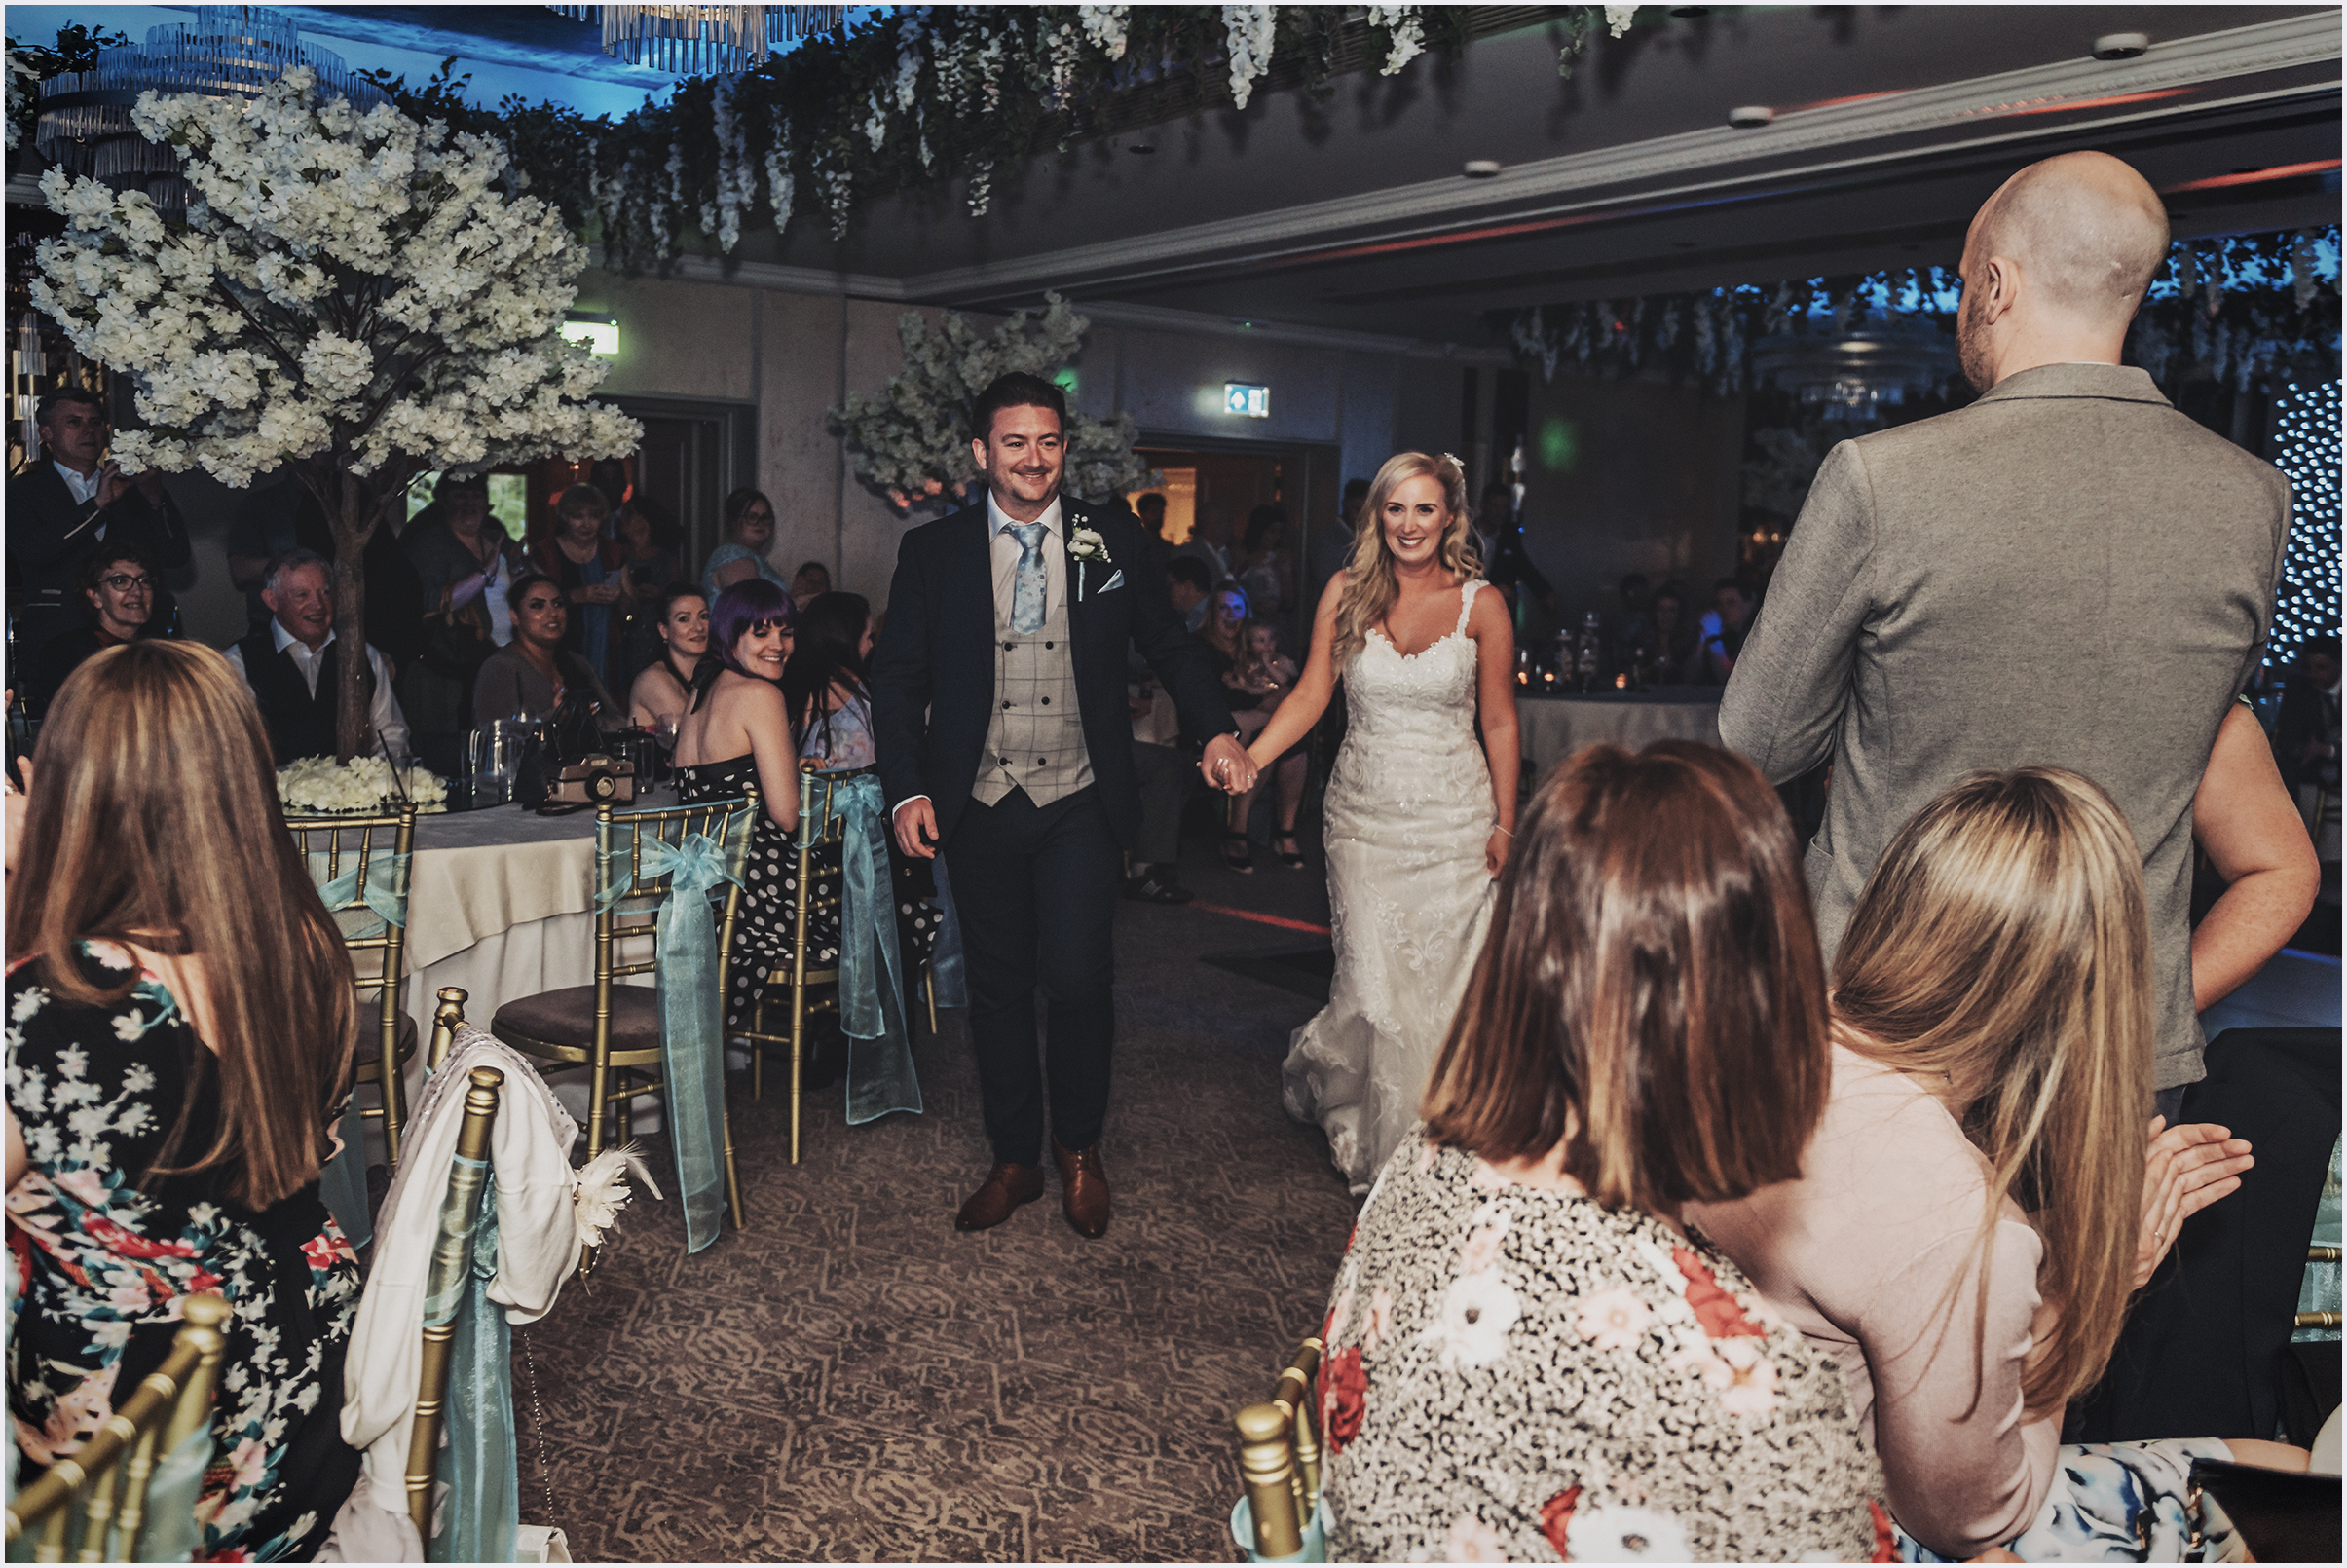 A bride and groom walk happily hand in hand towards the dance floor for their first dance.  Guests smiling at them.  